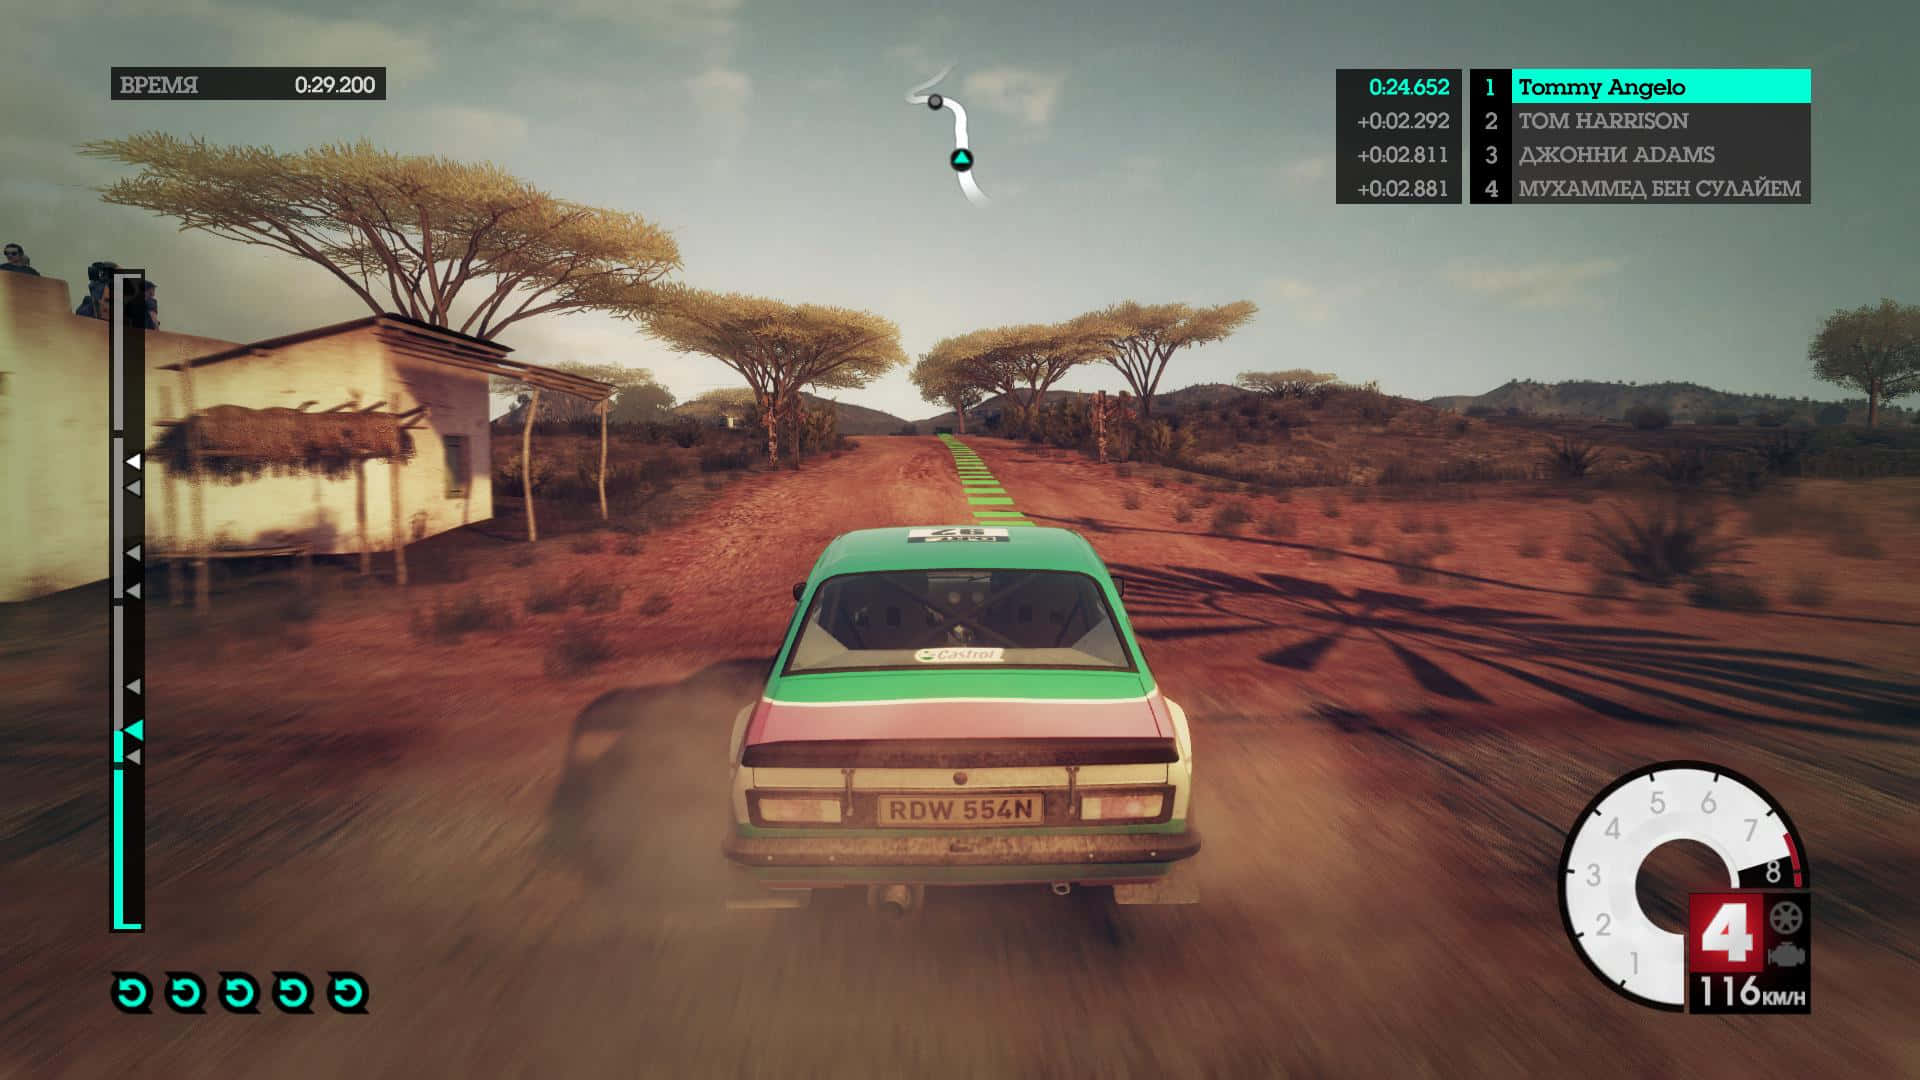 A Car Driving Down A Dirt Road In A Video Game